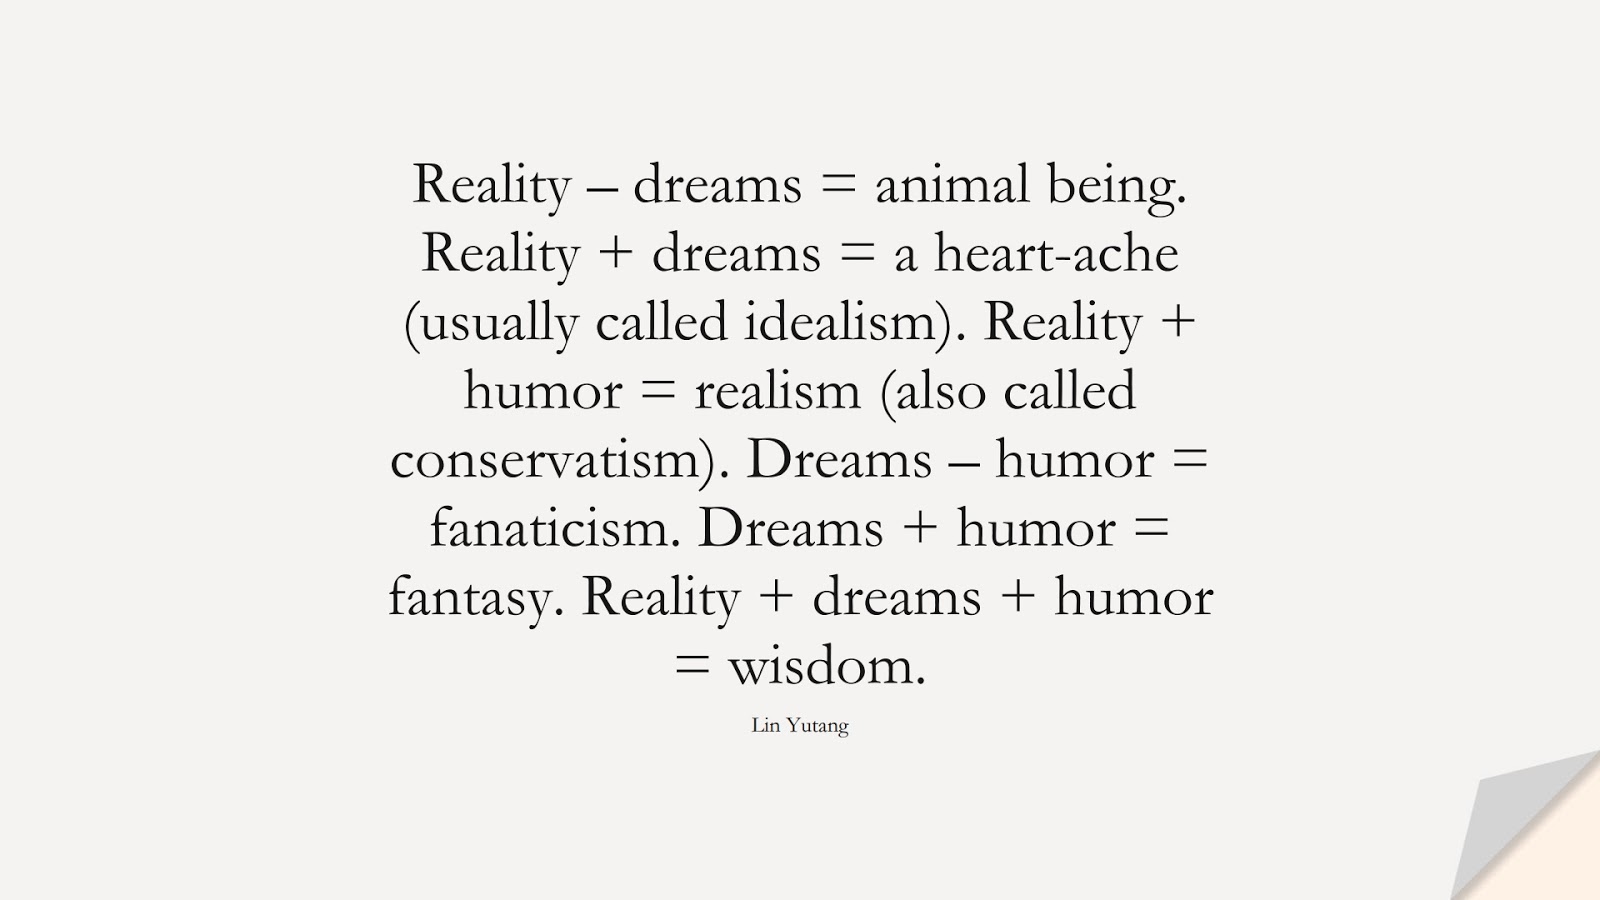 Reality – dreams = animal being. Reality + dreams = a heart-ache (usually called idealism). Reality + humor = realism (also called conservatism). Dreams – humor = fanaticism. Dreams + humor = fantasy. Reality + dreams + humor = wisdom. (Lin Yutang);  #WordsofWisdom